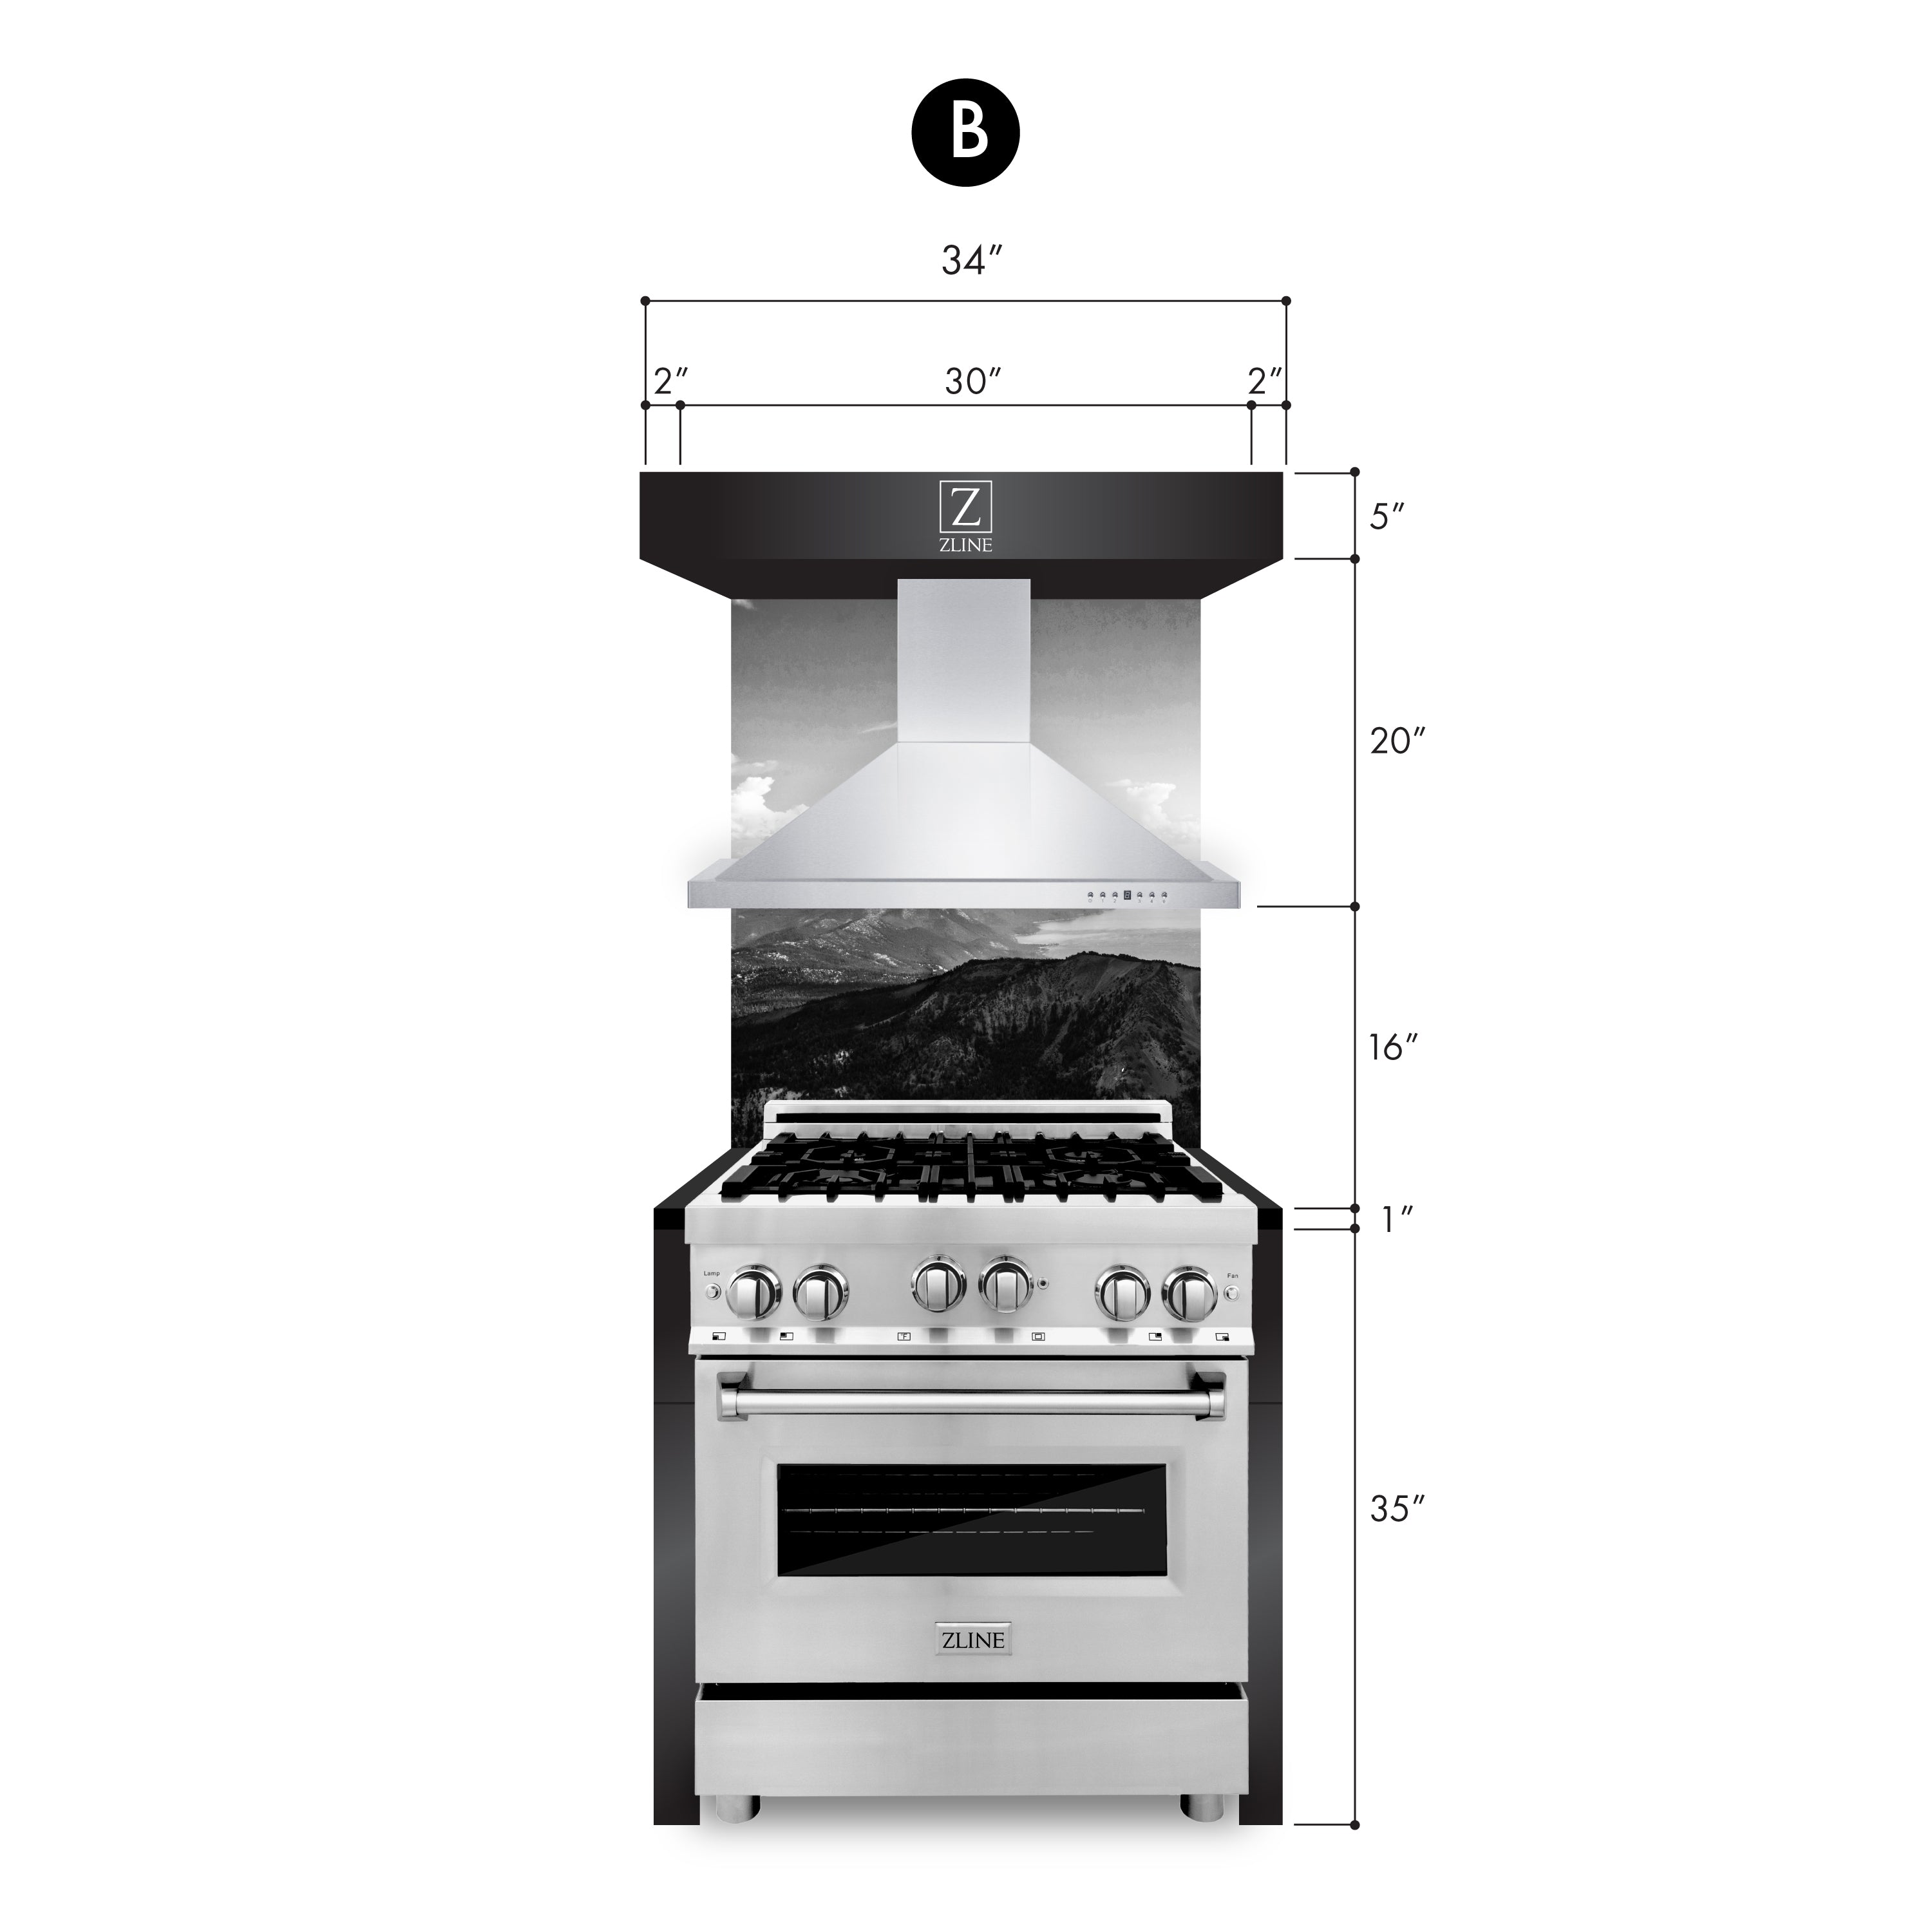 ZLINE Kitchen Vignette with a Stainless Steel Range Hood and Dual Fuel Range (VND-B-RA)